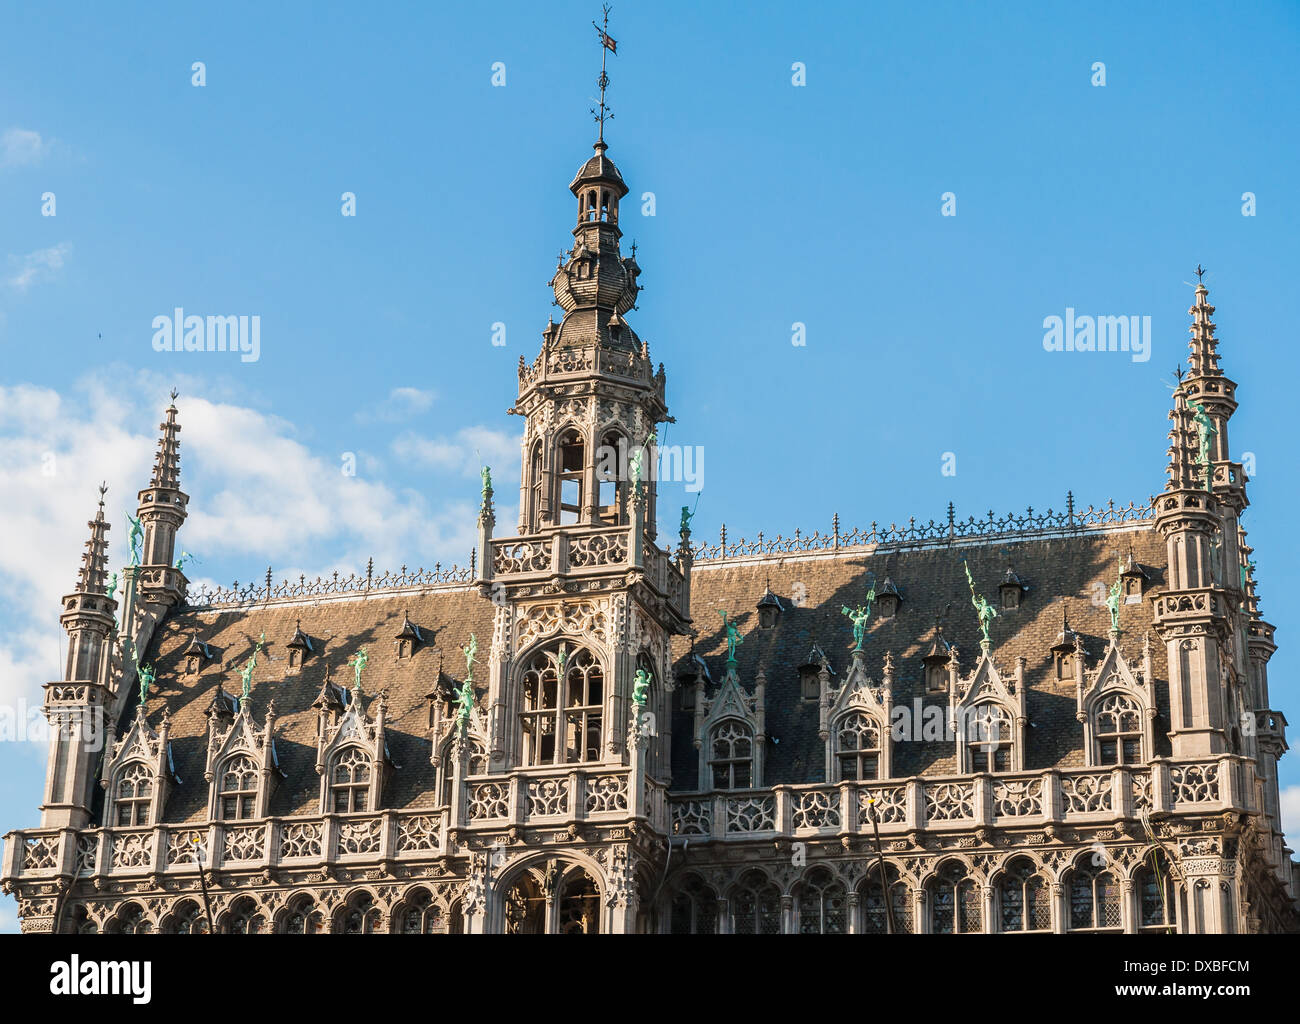 Facade of the Kings House and Museum of the City in Brussels, Belgium Stock Photo